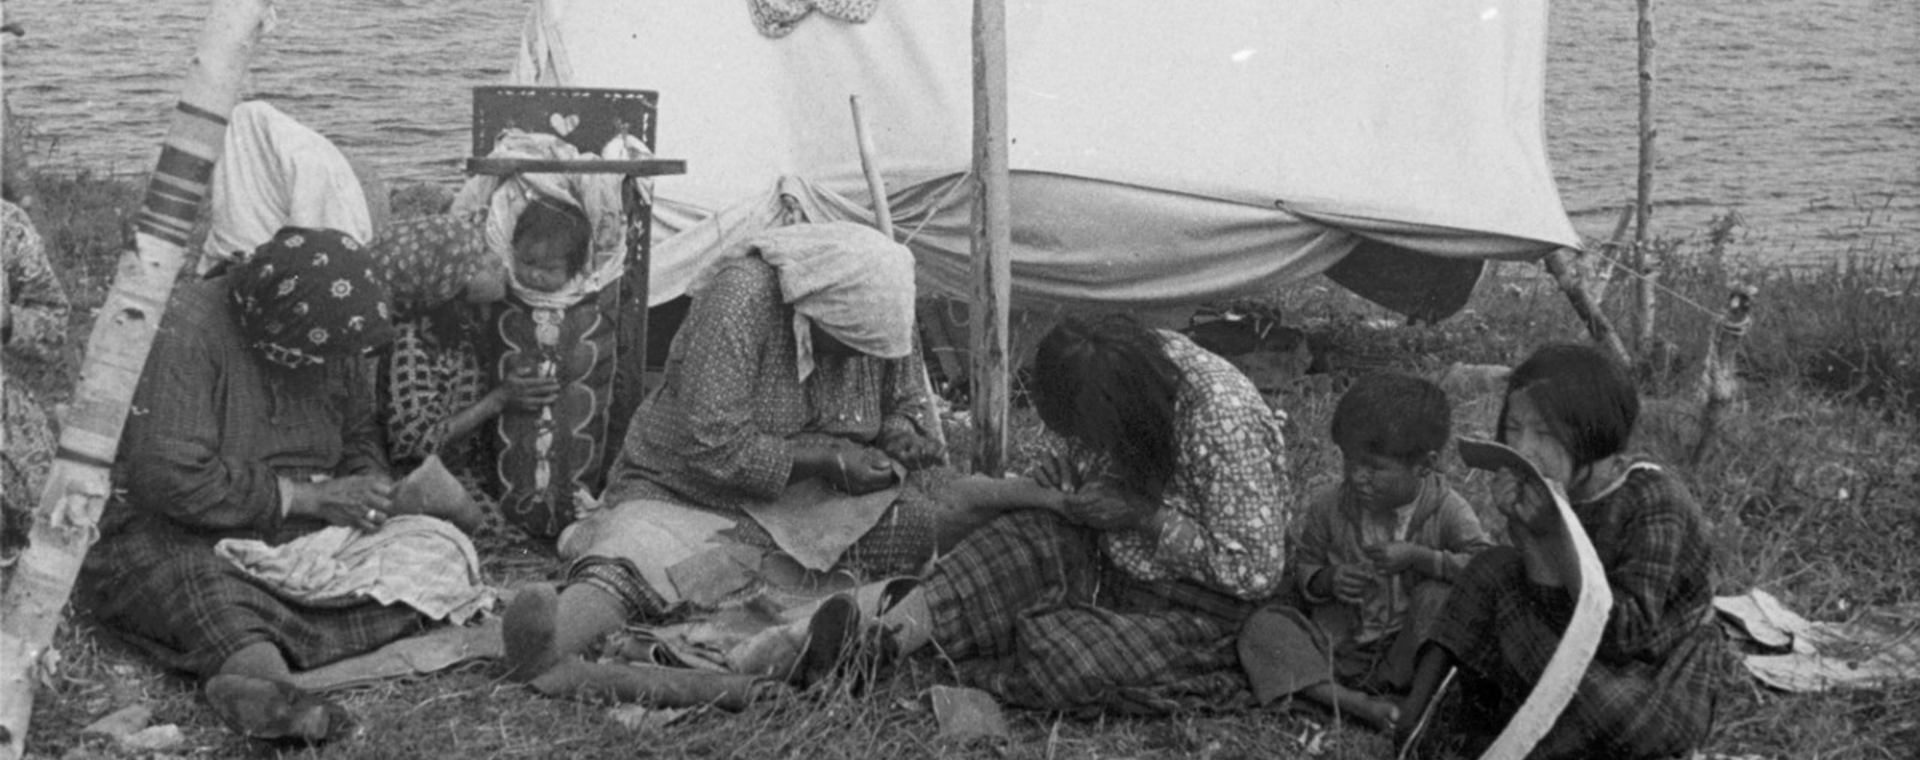 The photo is in black and white. Anicinabek women and children are sitting on the grass. Lake is in the background. They are near a small canvas tent. The women are busy sewing moccasins while the children watch or play. A baby is sitting in a tikinagan, a traditional baby carrier.